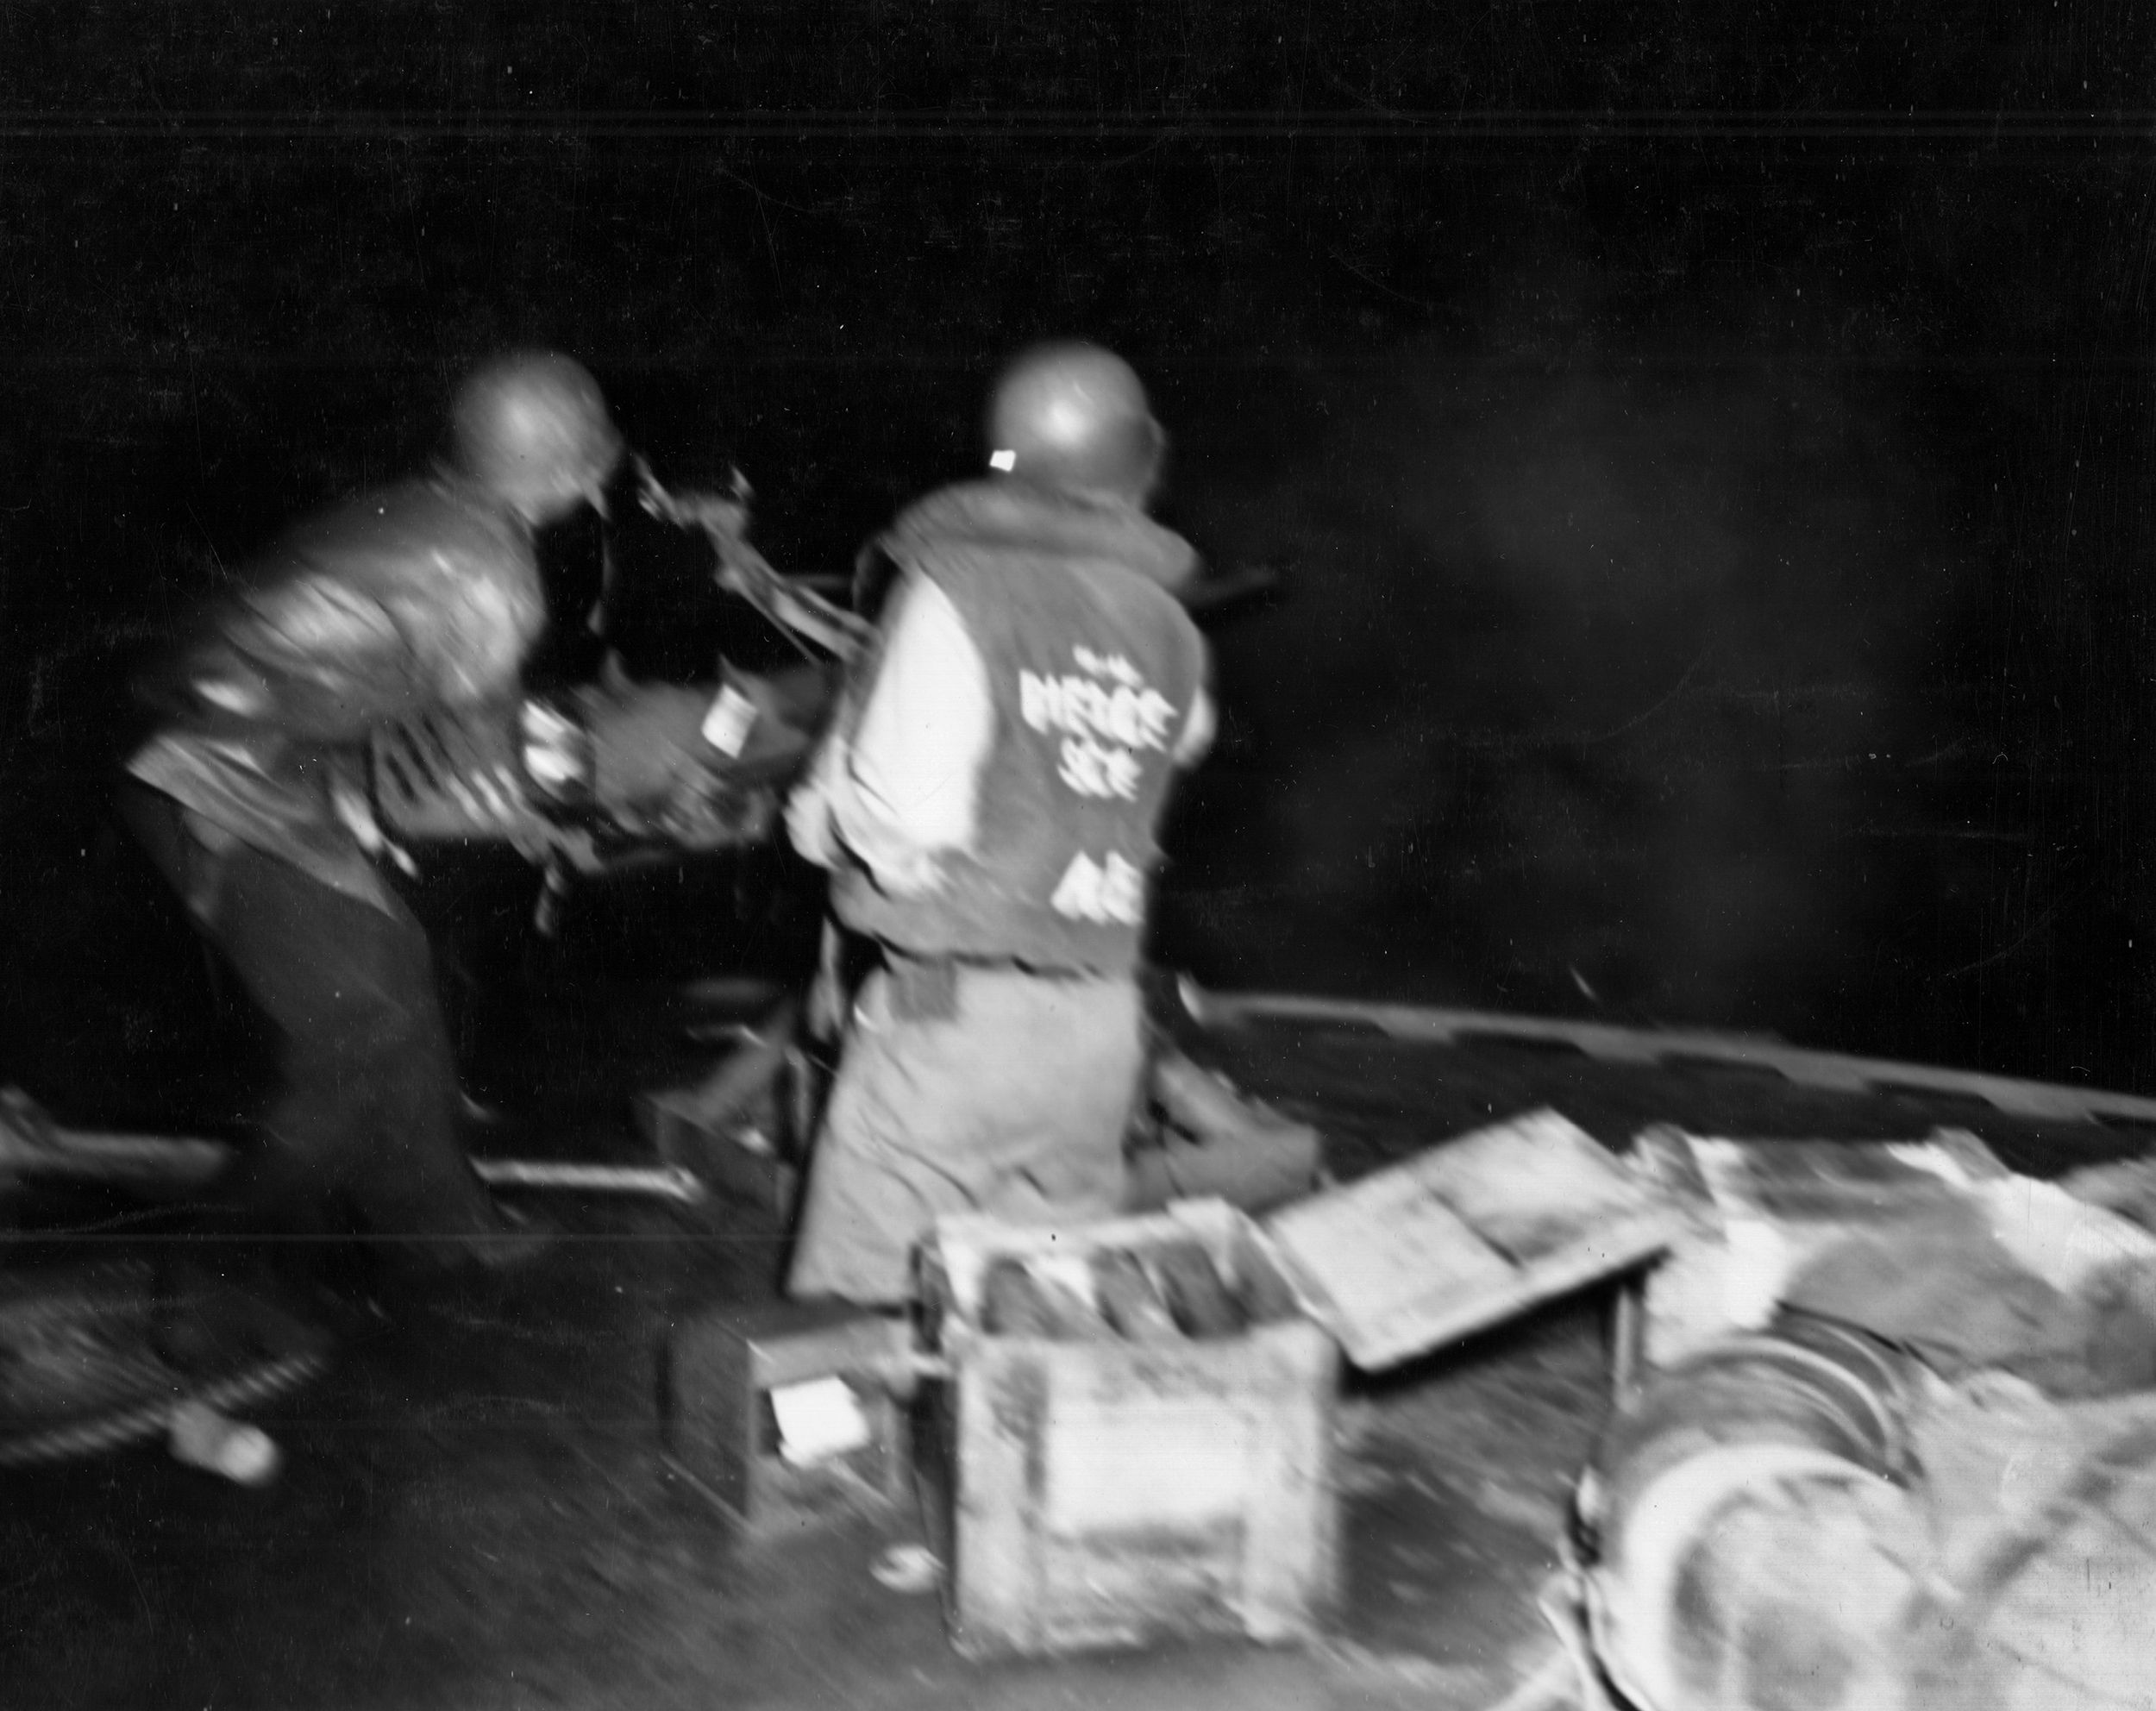 Its blast causing the camera to twitch, blurring the image, two PT-boat sailors fire what is most likely a .50-cal. M2 Browning machine gun during a night engagement. The PT-boats were small but swift and heavily armed.